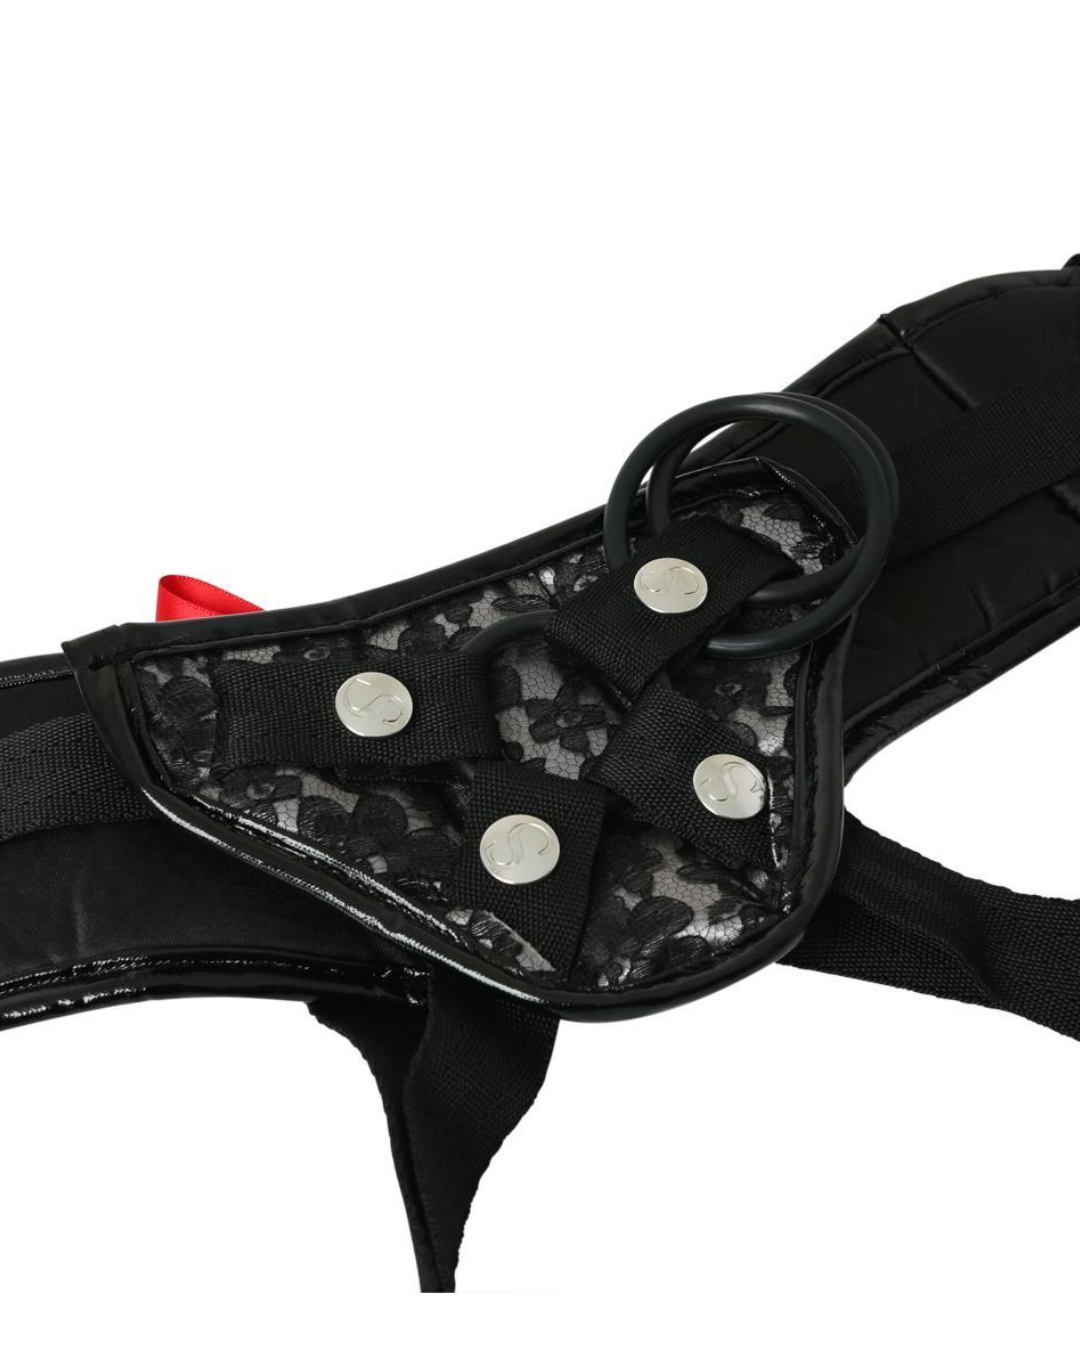 Platinum Black Lace Corsette Strap On Harness- One Size Fits Most by Sportsheets close up of front